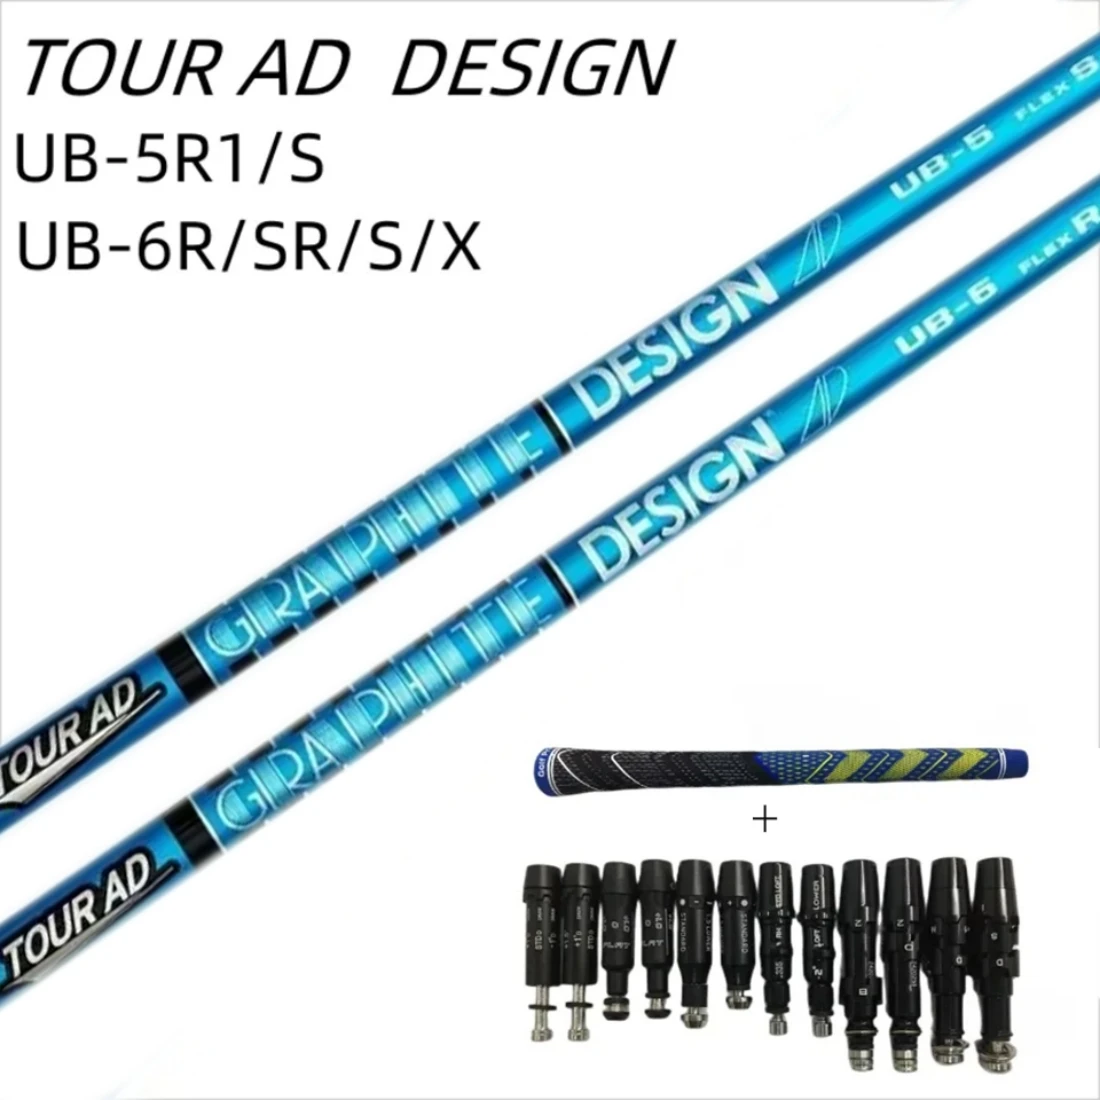 

Brand New Golf Clubs Shaft TOUR AD UB5/UB6 Graphite Shaft Driver and wood Shafts Free assembly sleeve and grip